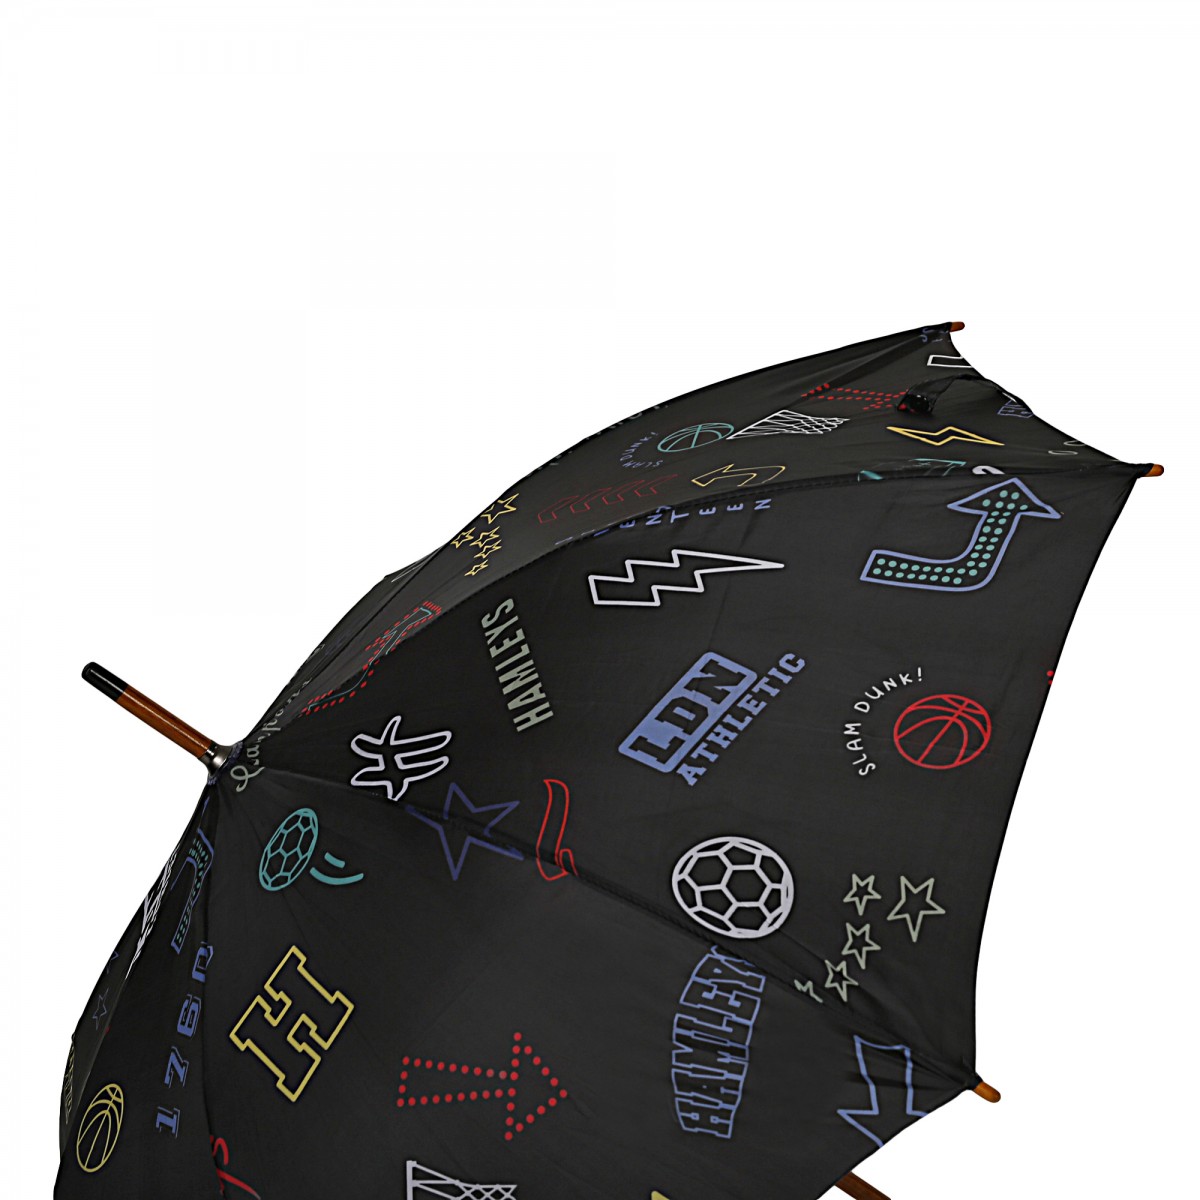 Hamleys London Athletic Print 28 inches Single Fold Rain Umbrella with Wooden Bend Handle and Auto Open Long Umbrellas, Kids for 5Y+, Black